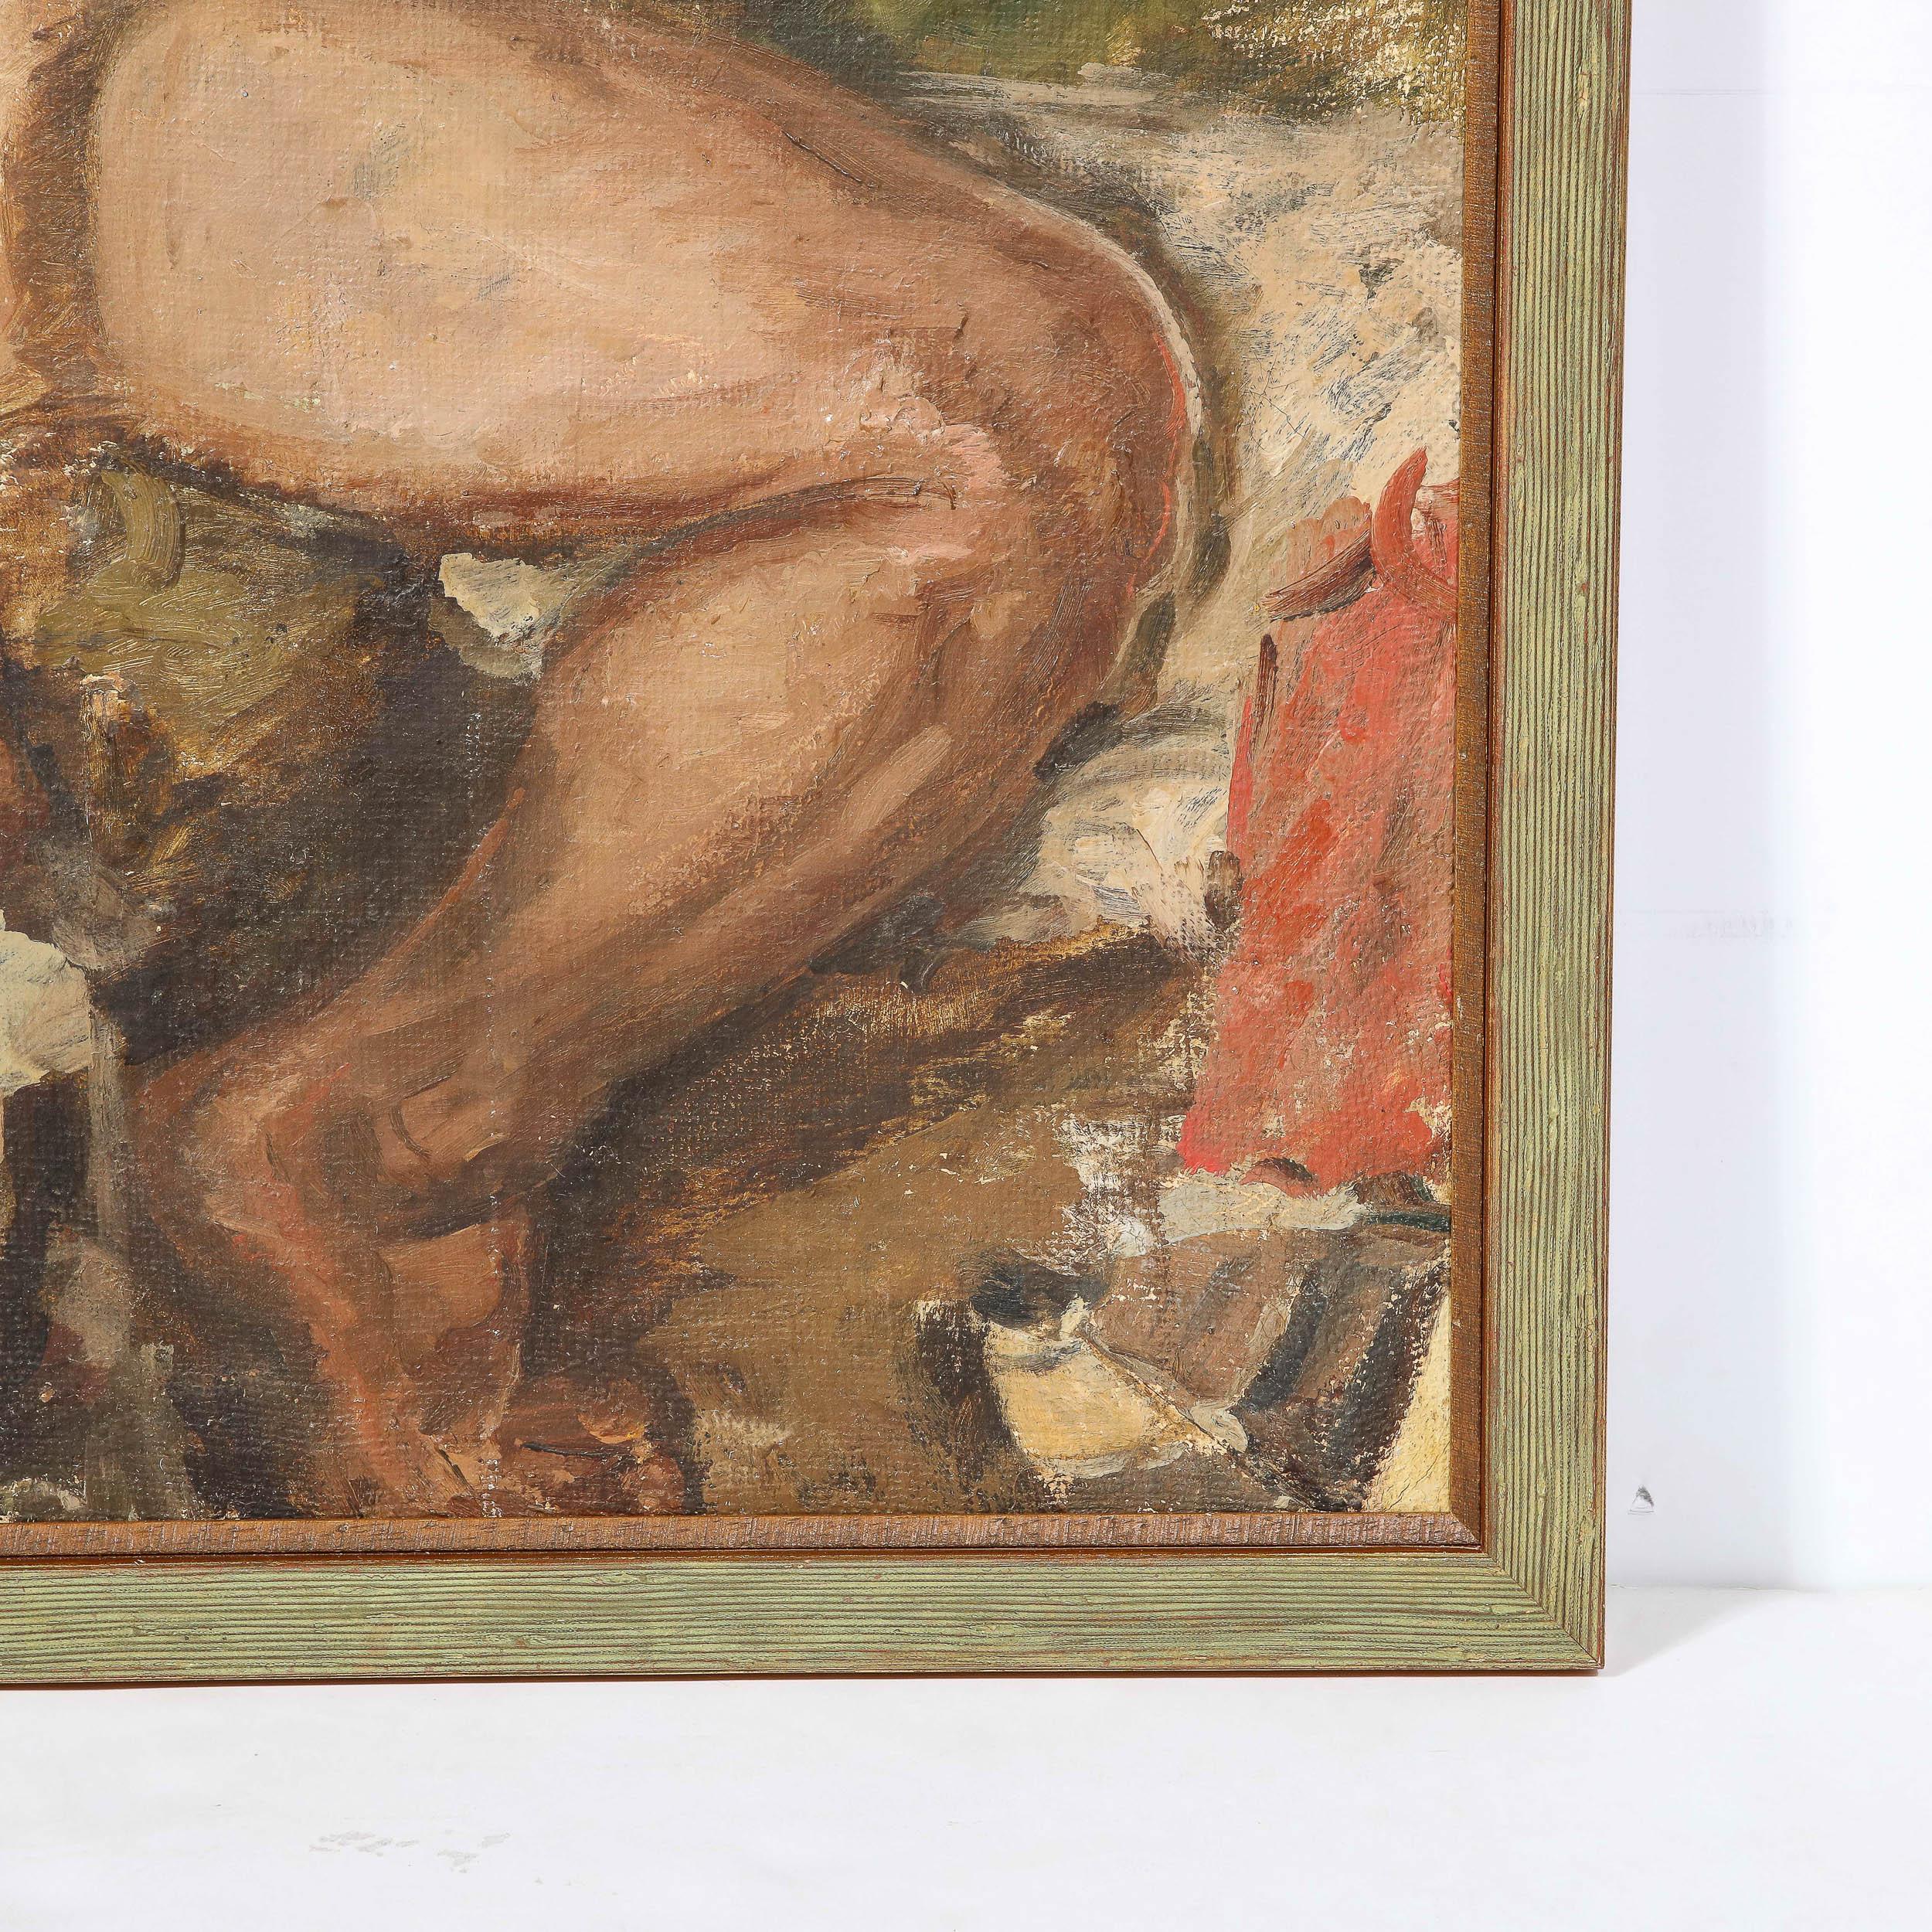 This elegant romanticist oil on burlap painting was realized by an unheralded master during the first part of the 20th century. Realized in tight, yet expressionistic brush strokes, the painting depicts a nude male figure in the foreground with his